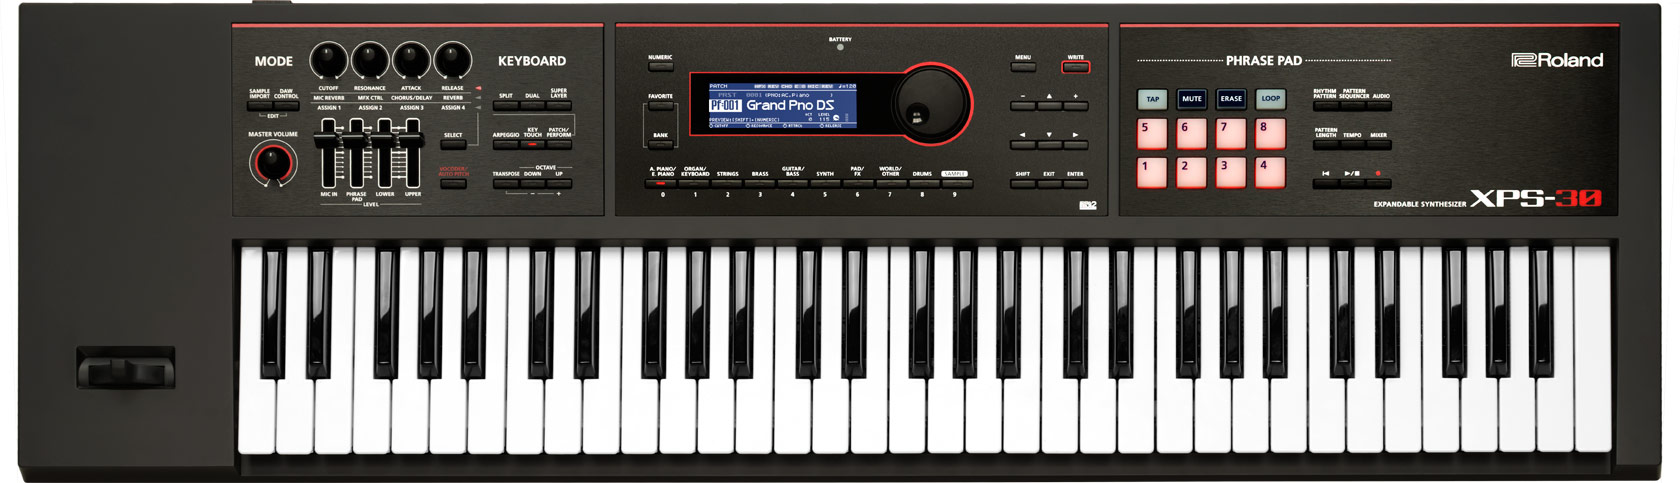 Roland gw 8 styles download for pc